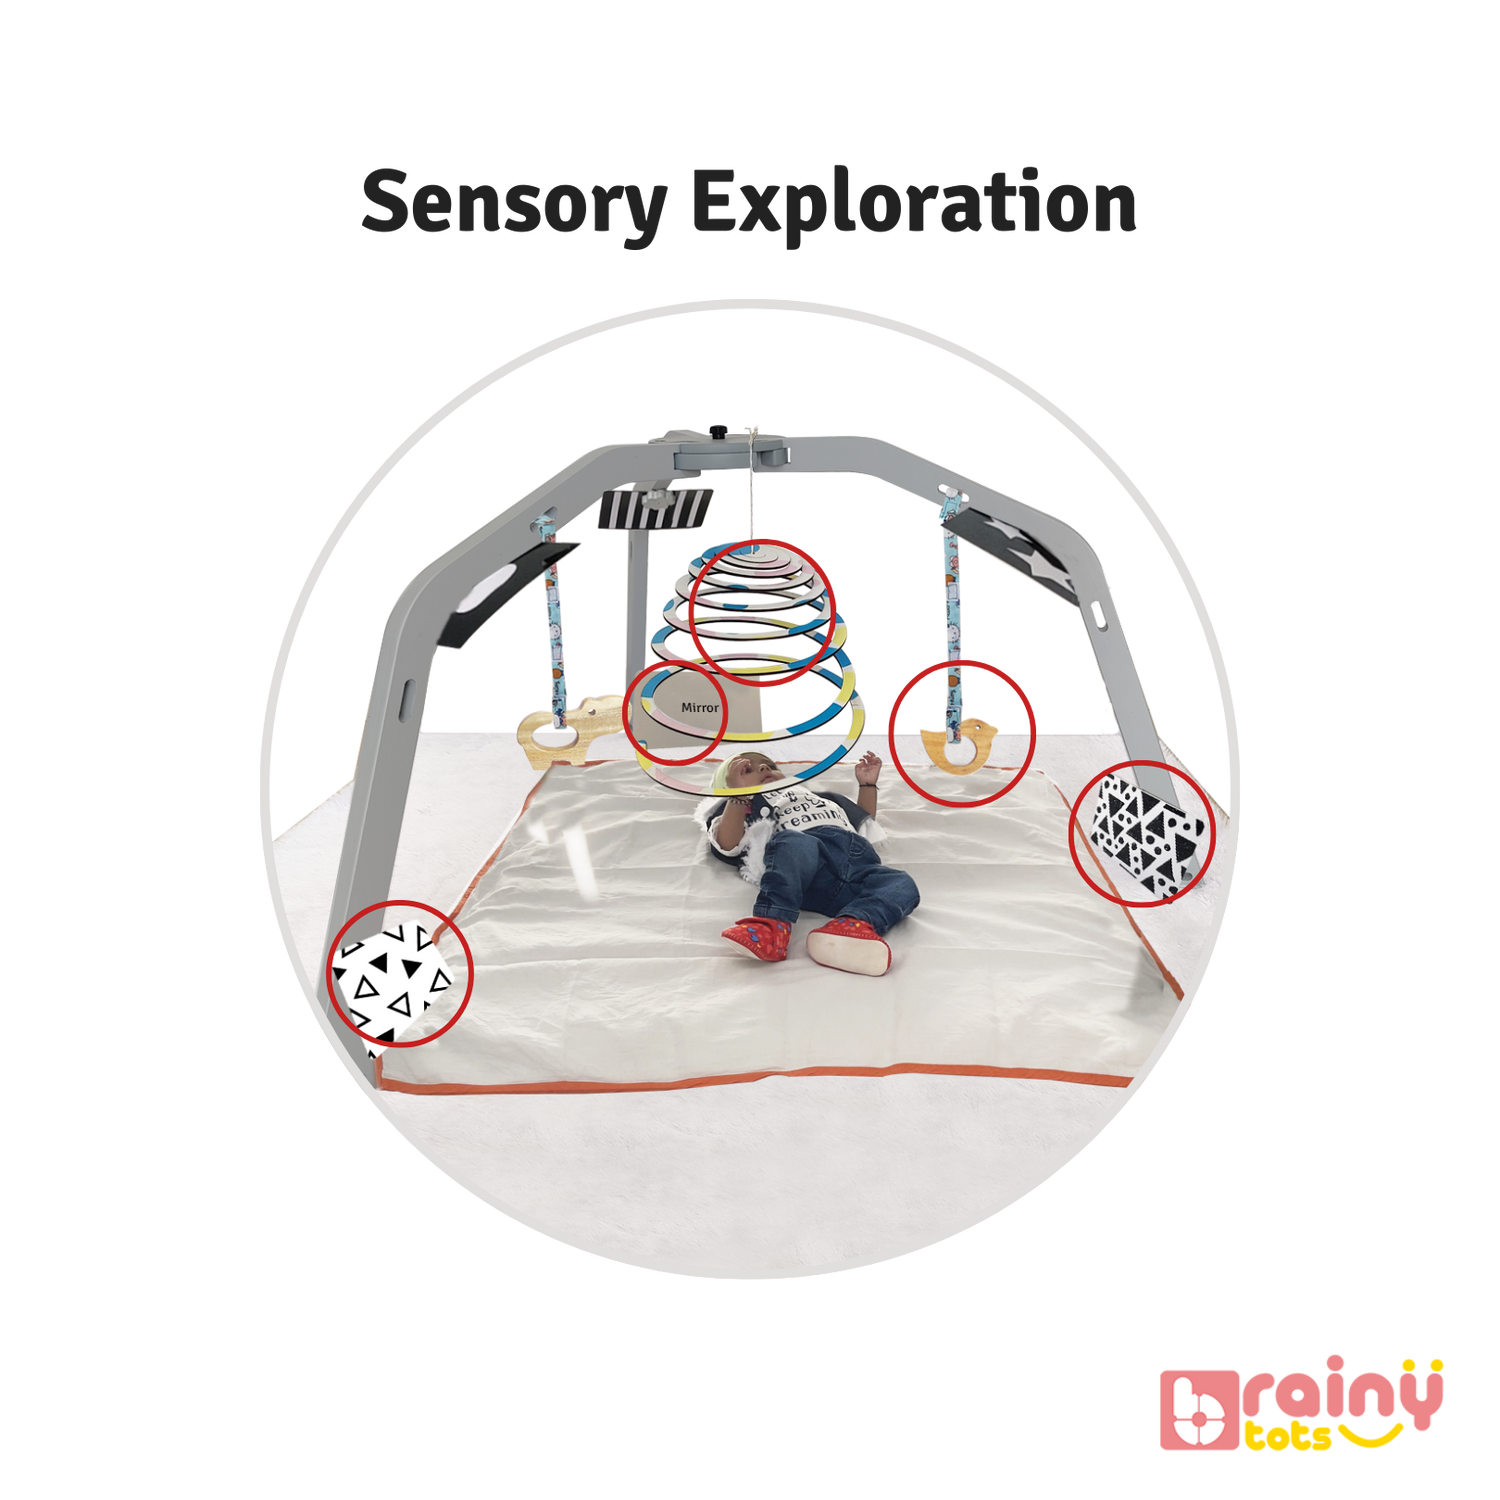 Enhances sensory development with varied textures and interactive elements. This Montessori wooden play gym, ideal for infants aged 0-12 months, promotes motor skills and cognitive growth. Safe, sturdy, and engaging for early learning and exploration.